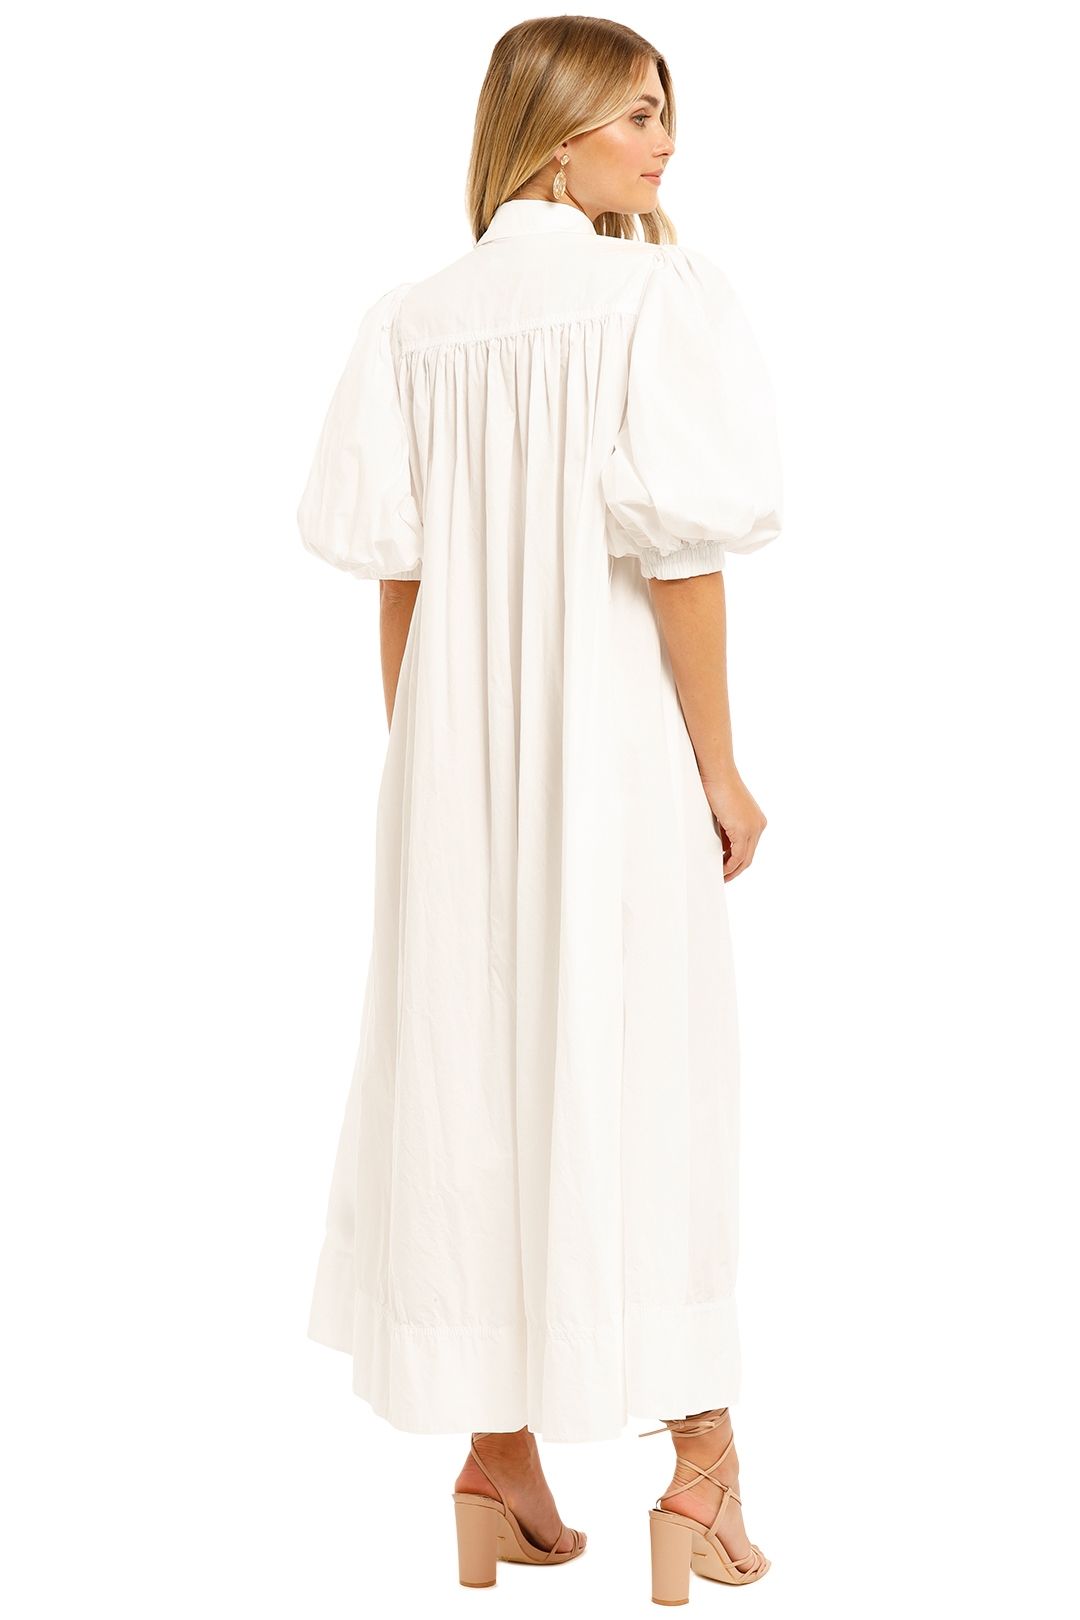 AJE Peace Dress in Ivory Puff Sleeves